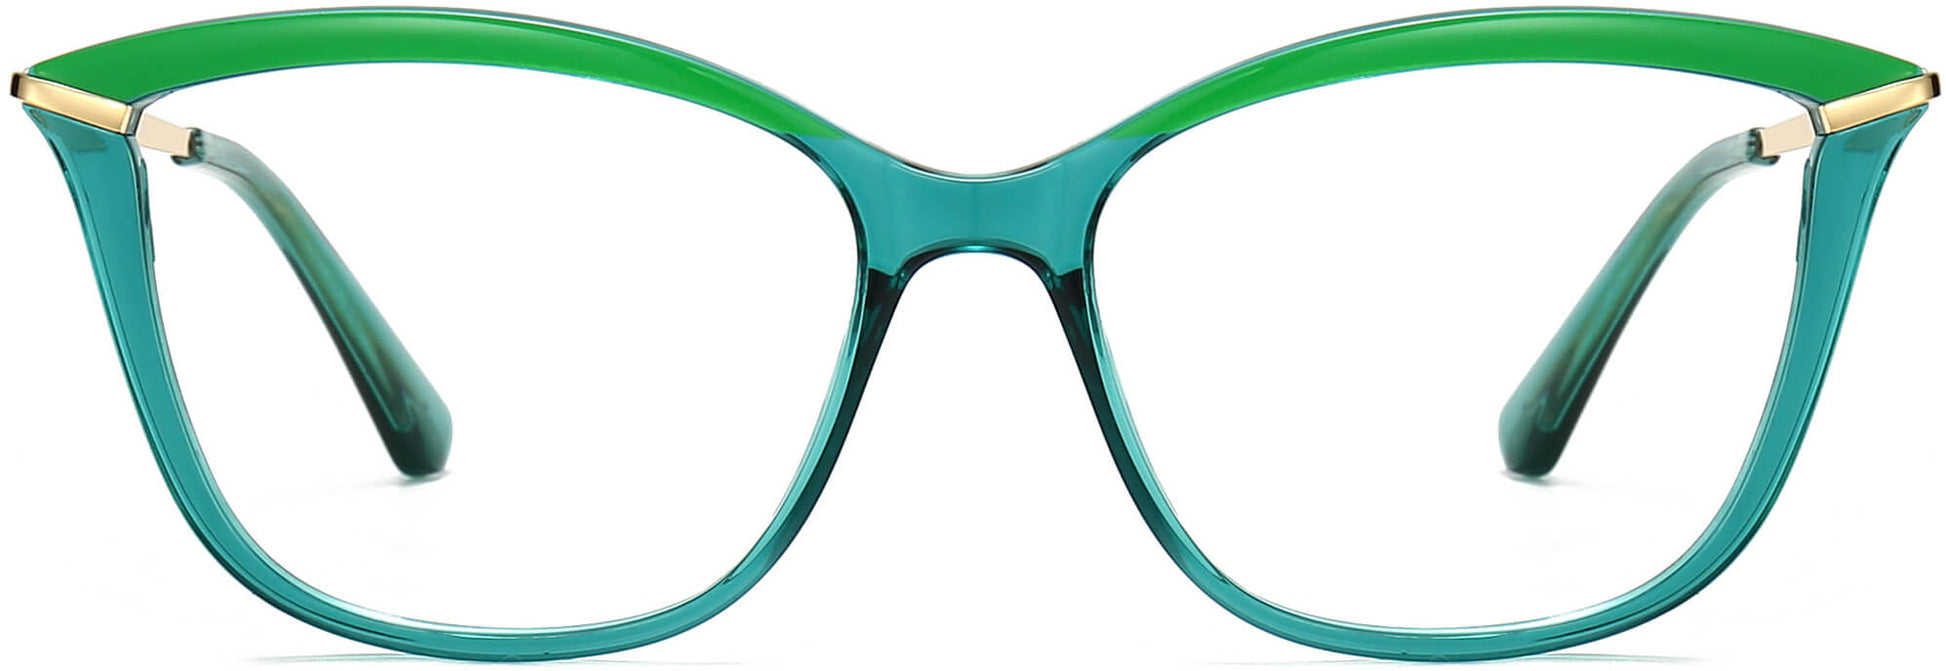 Nevaeh Cateye Green Eyeglasses from ANRRI, front view